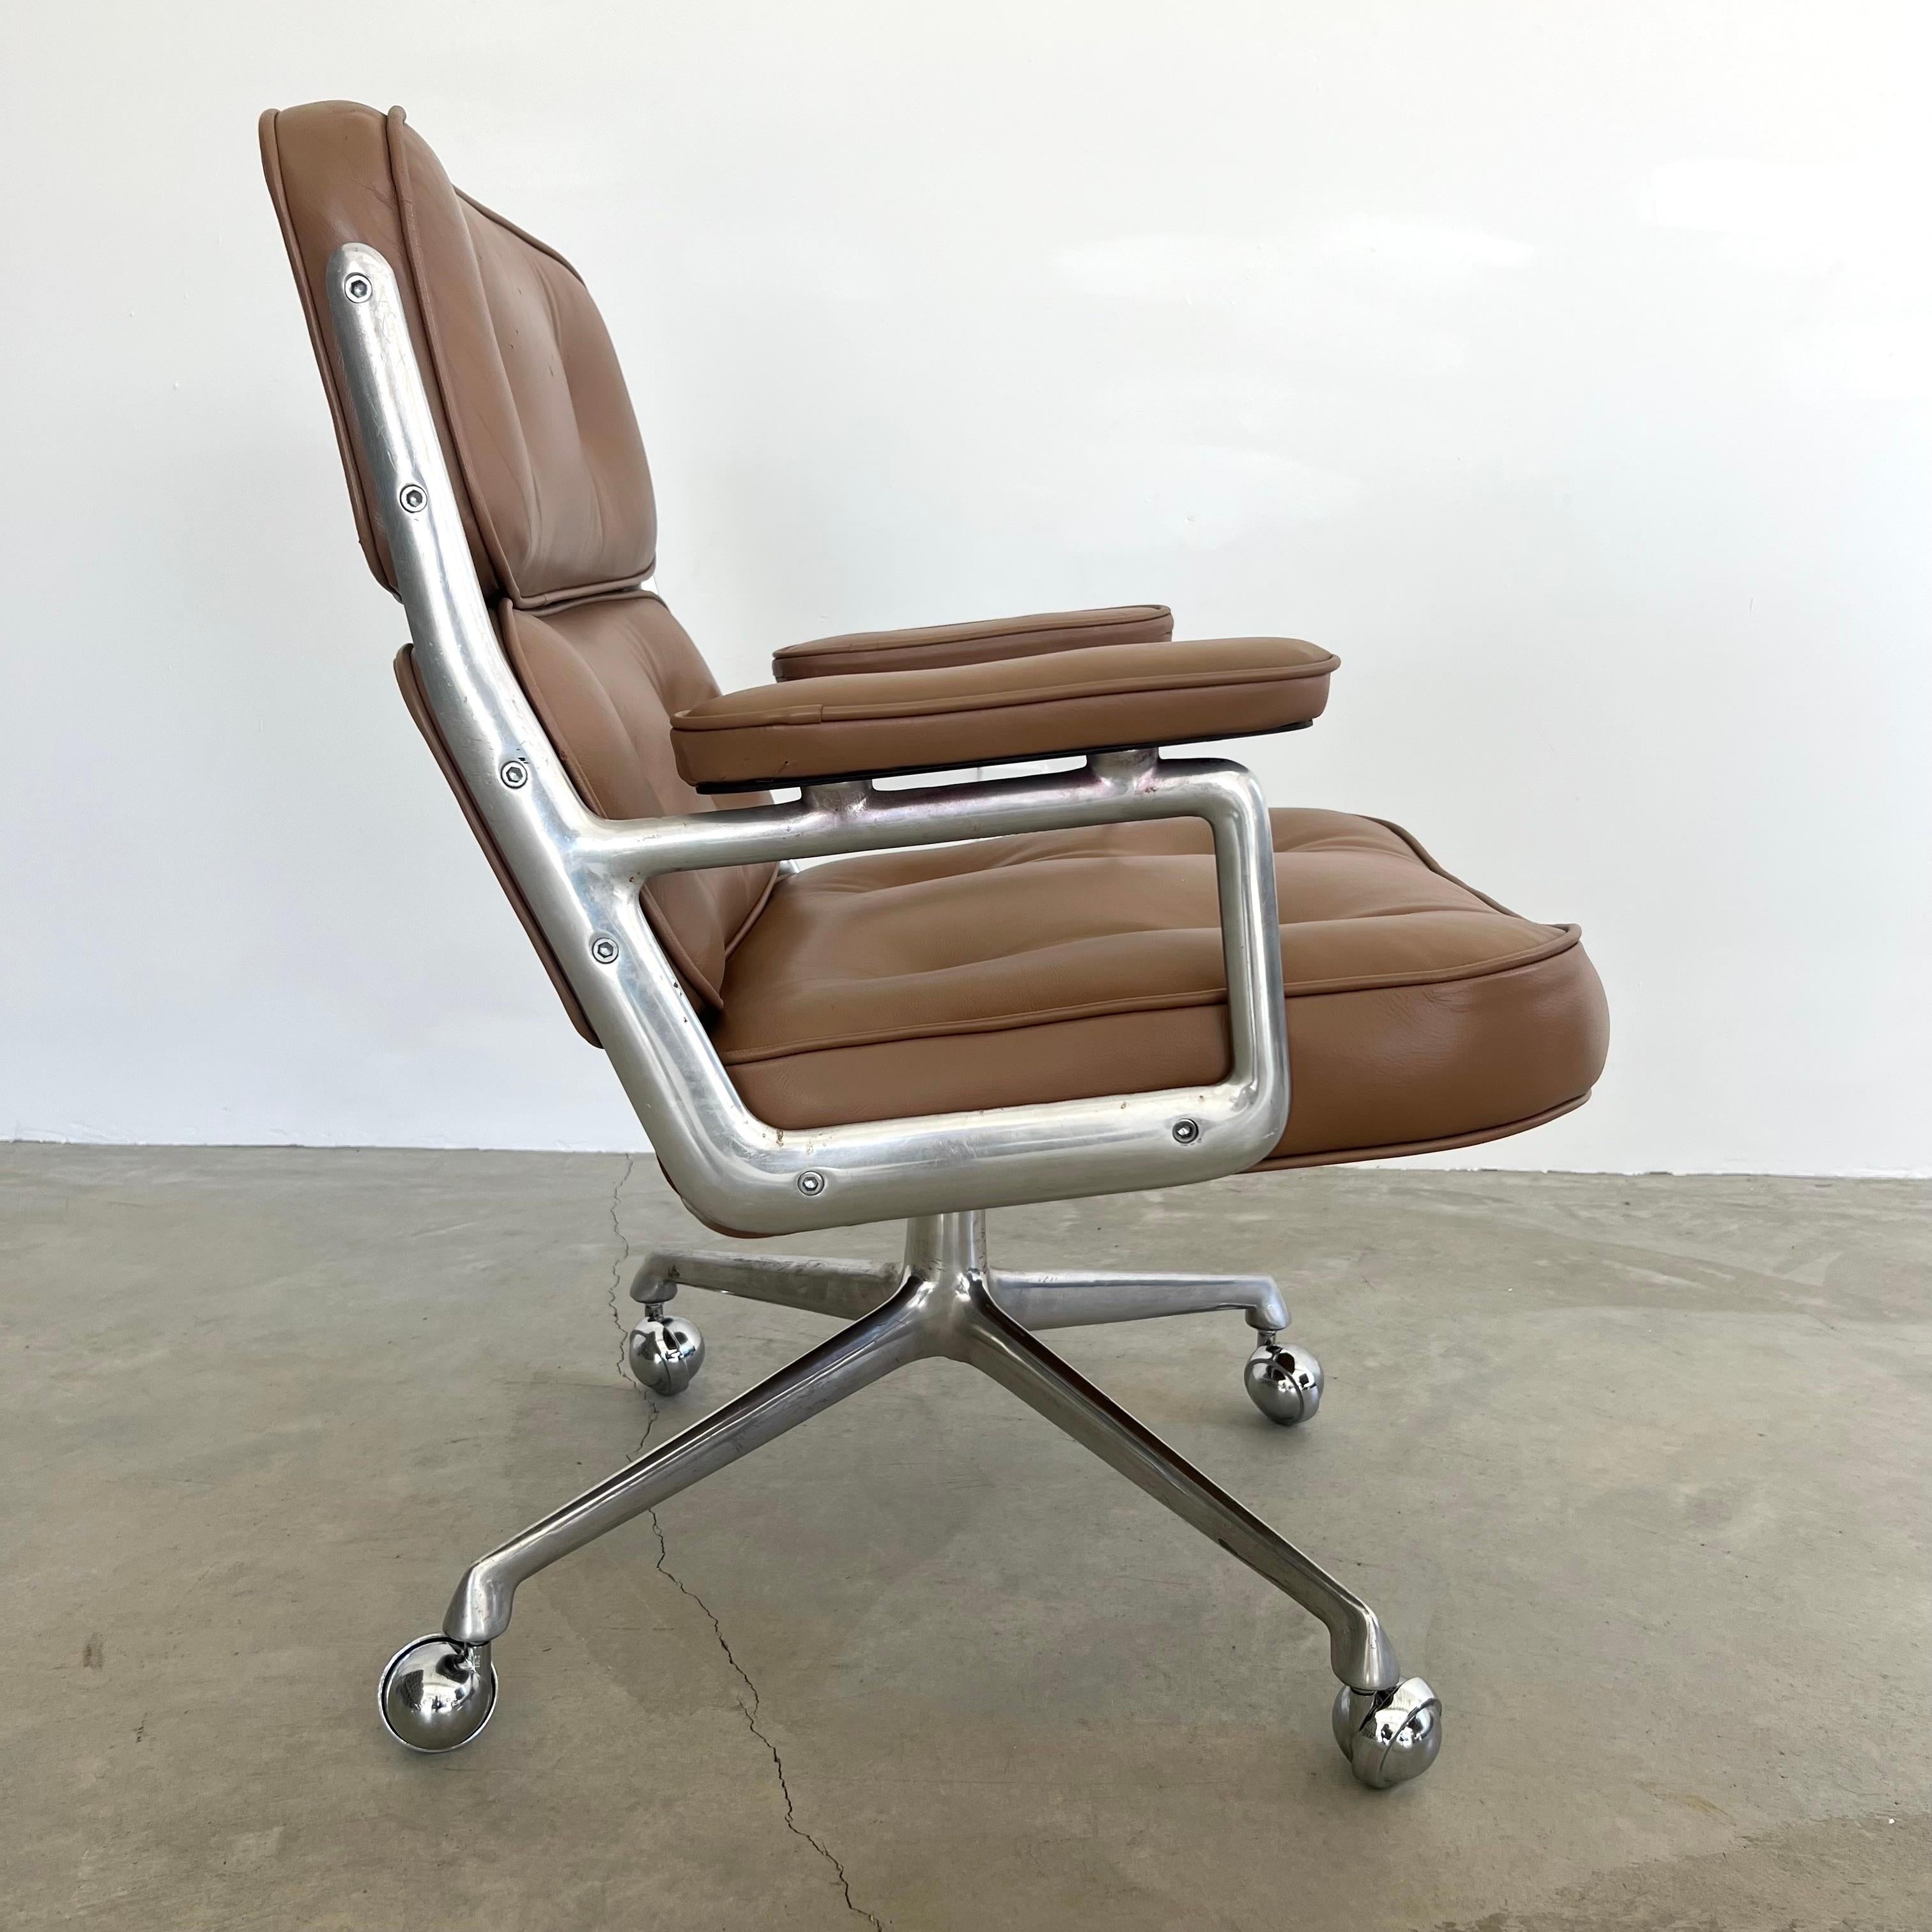 Classic Eames Time Life chair for Herman Miller in tan leather with a polished aluminum frame and legs. Originally designed in 1960 by Charles and Ray Eames for use in the lobby of the Time Life building in New York. 

Recently cleaned and leather